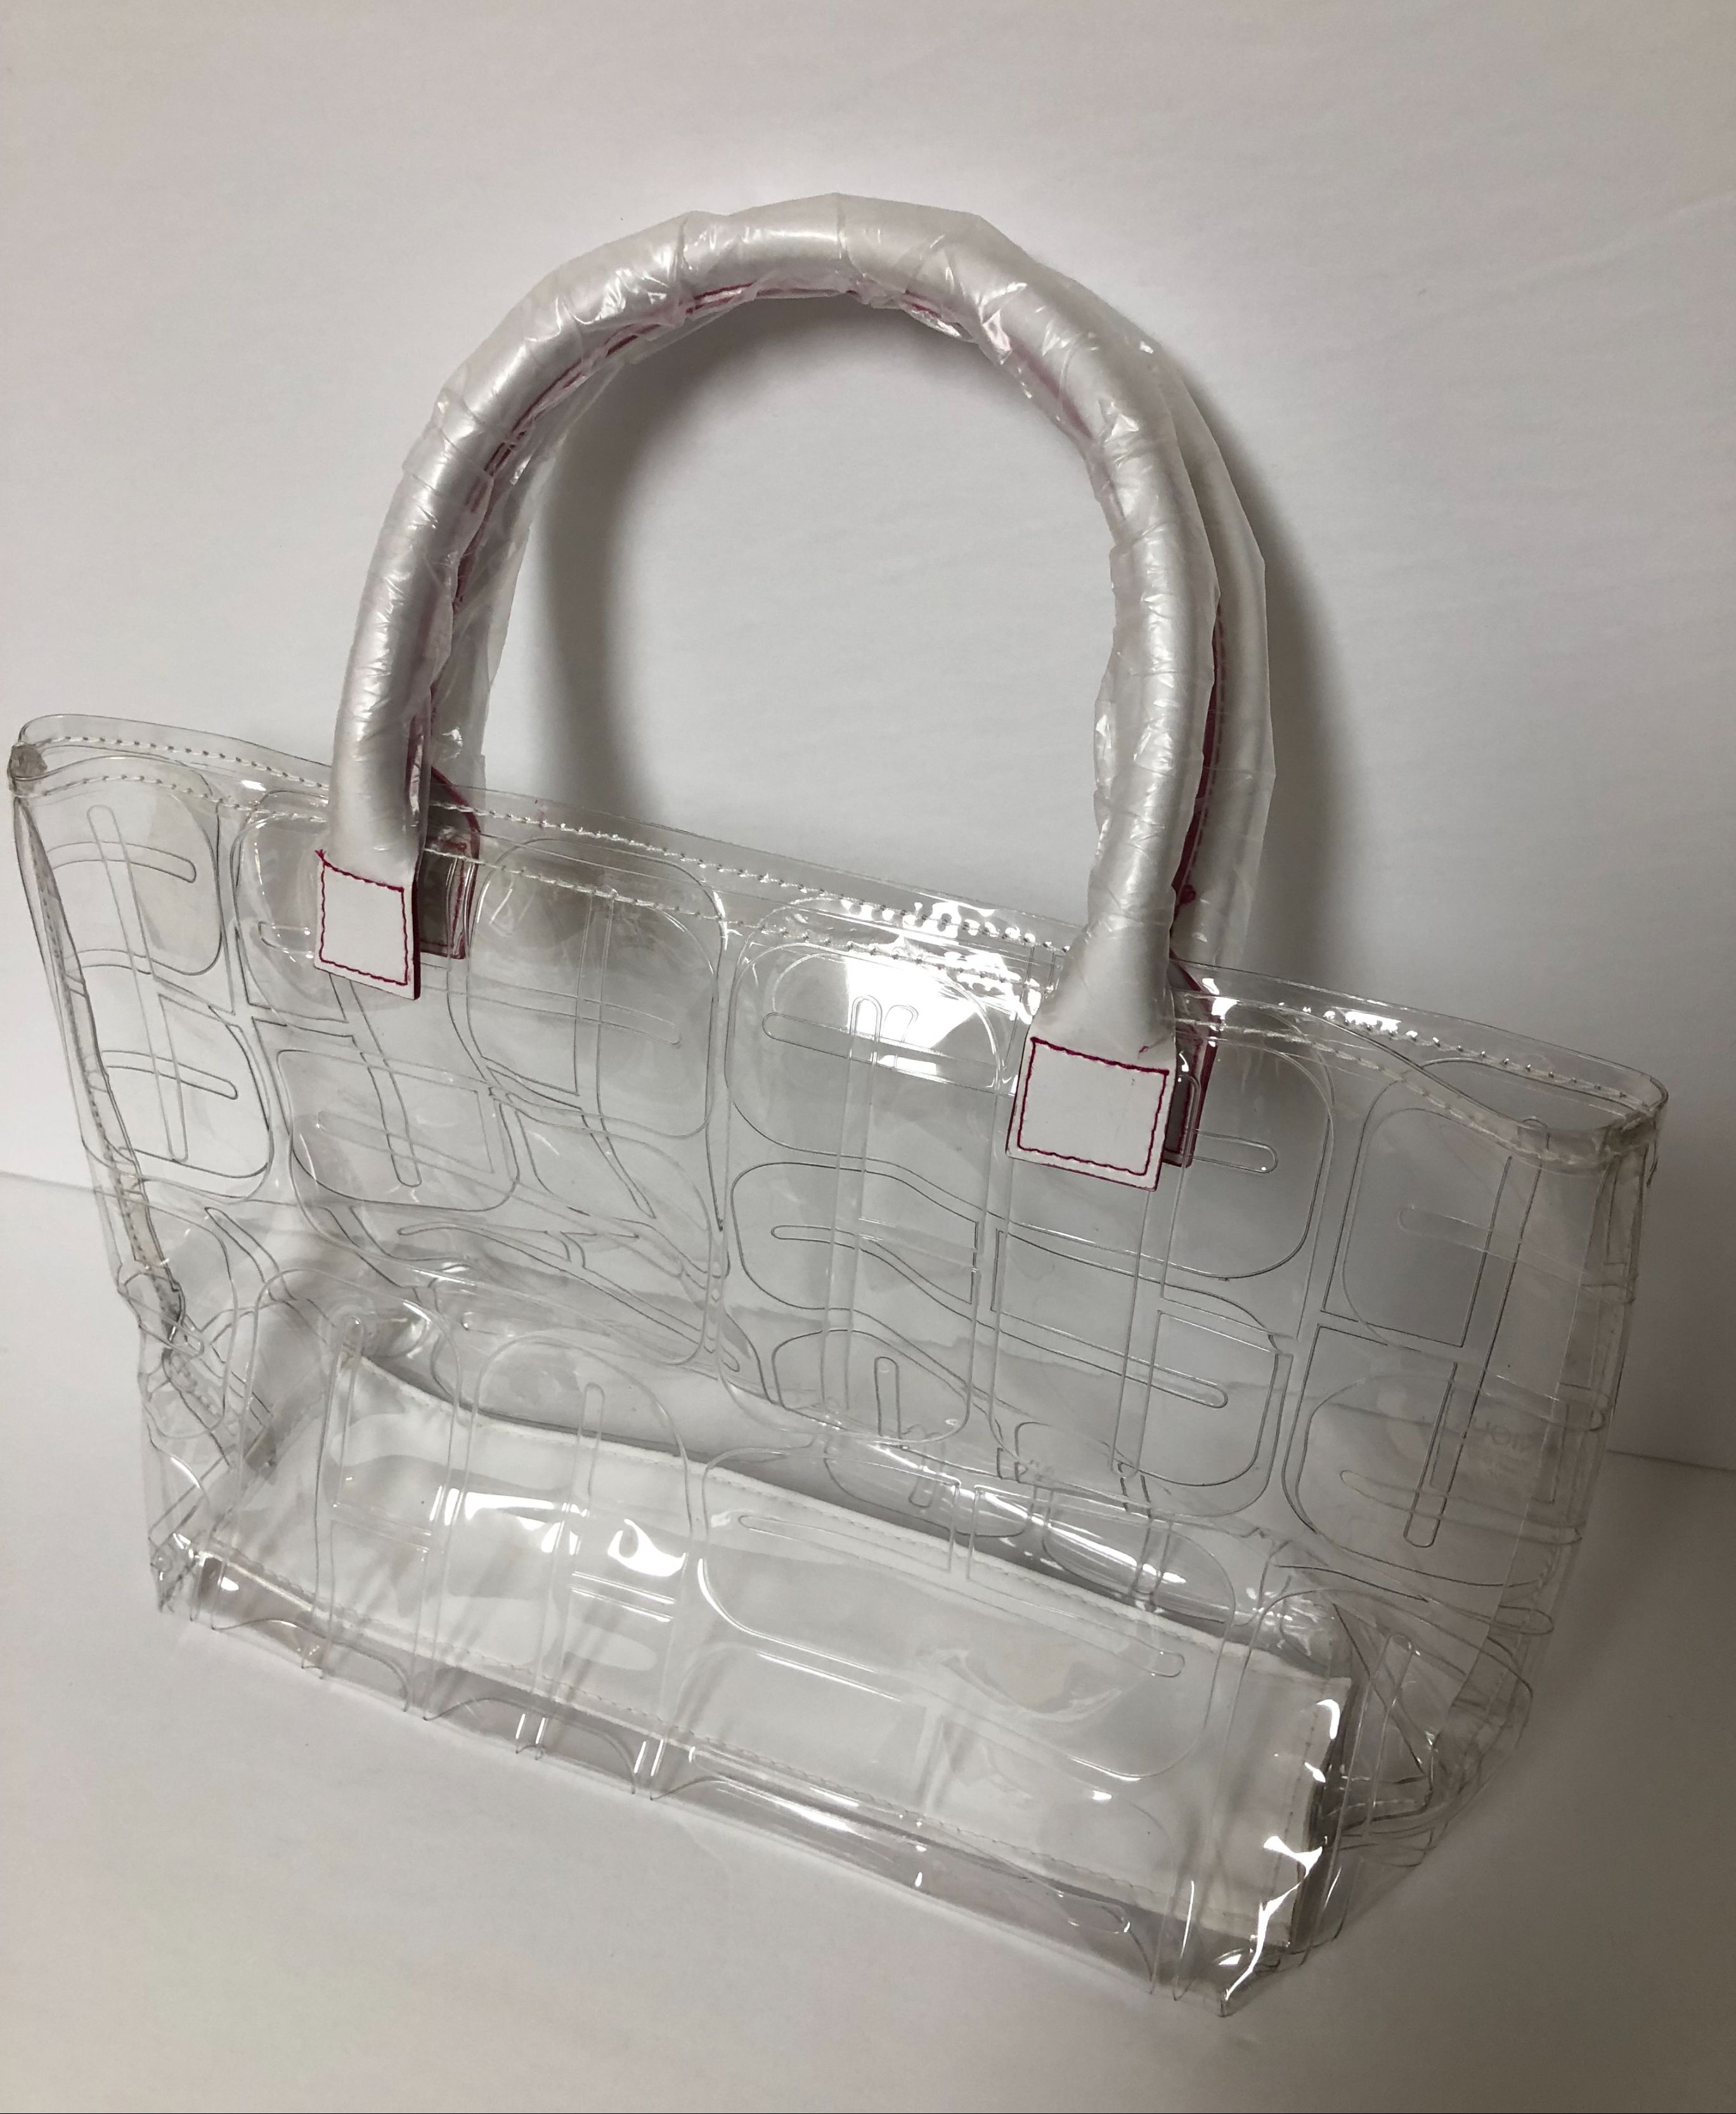 Clinique Clear Transparent Cosmetic Tote Bag w/ White Handle - Brand ...